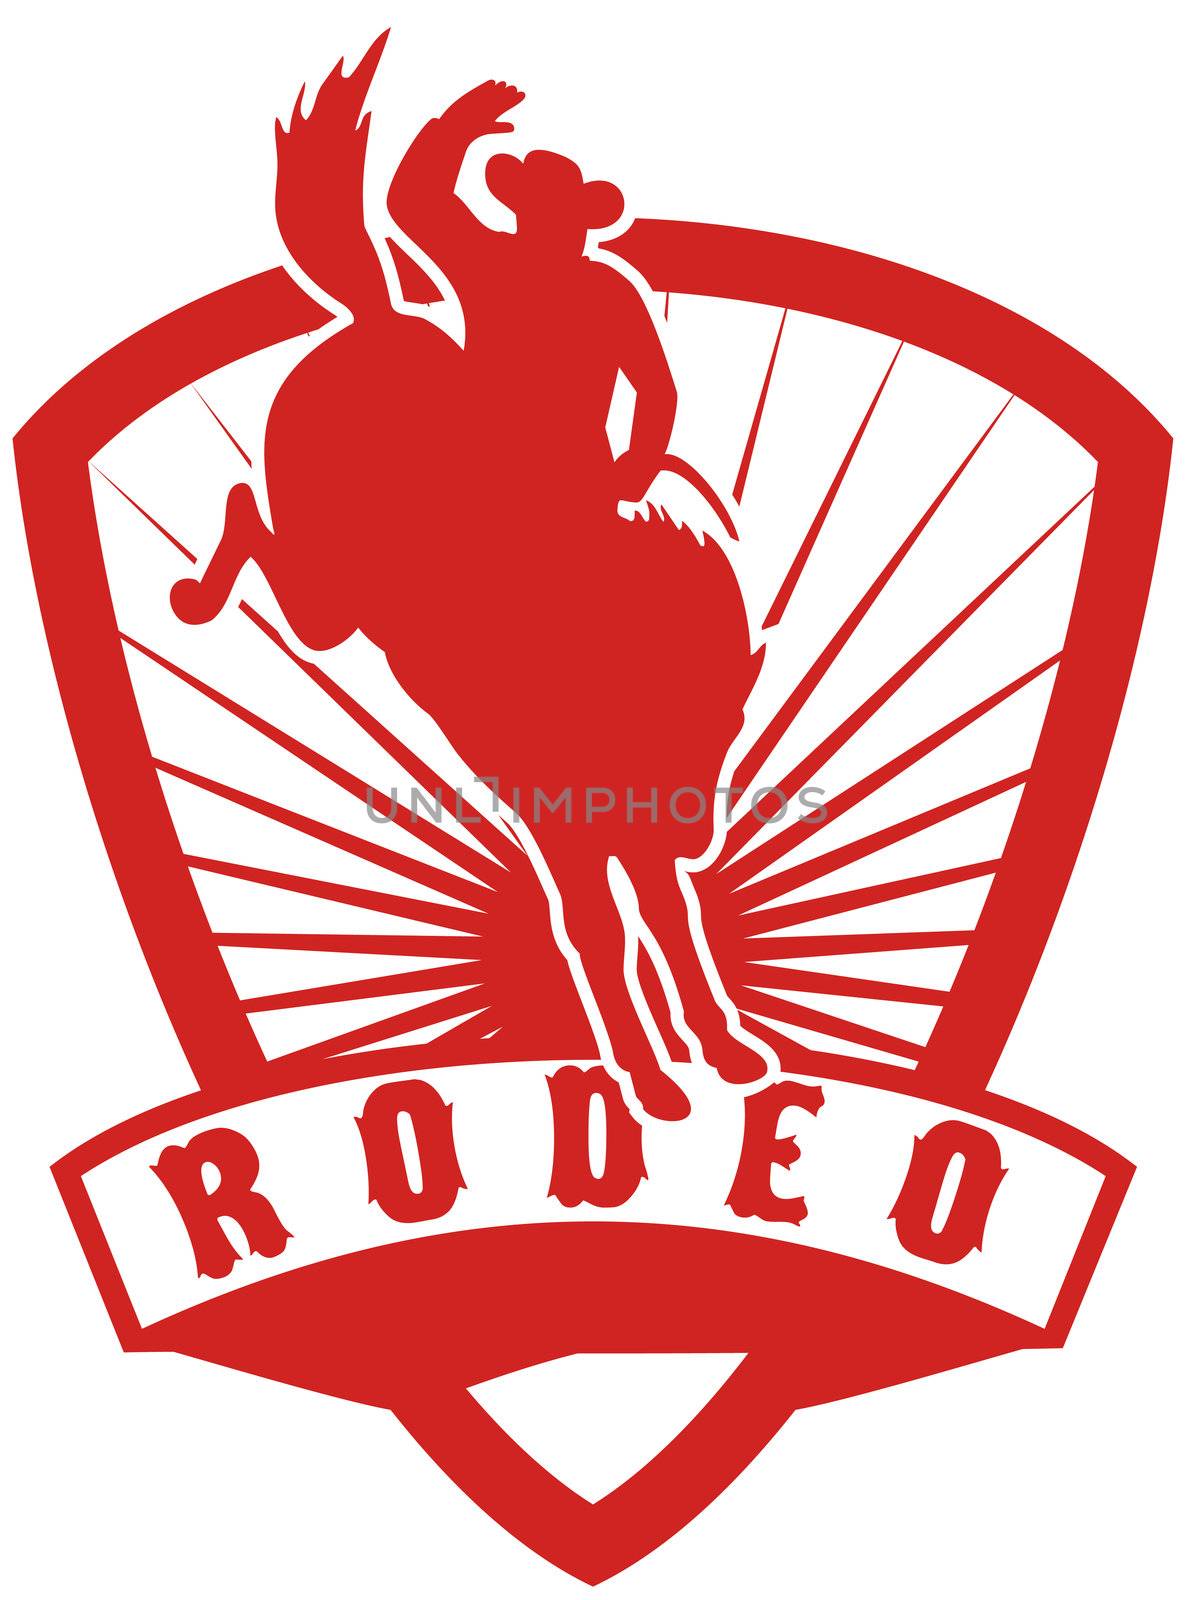 retro style illustration of an American  Rodeo Cowboy riding  a bucking bronco horse jumping with sunburst in  shield background and scroll with words "rodeo"